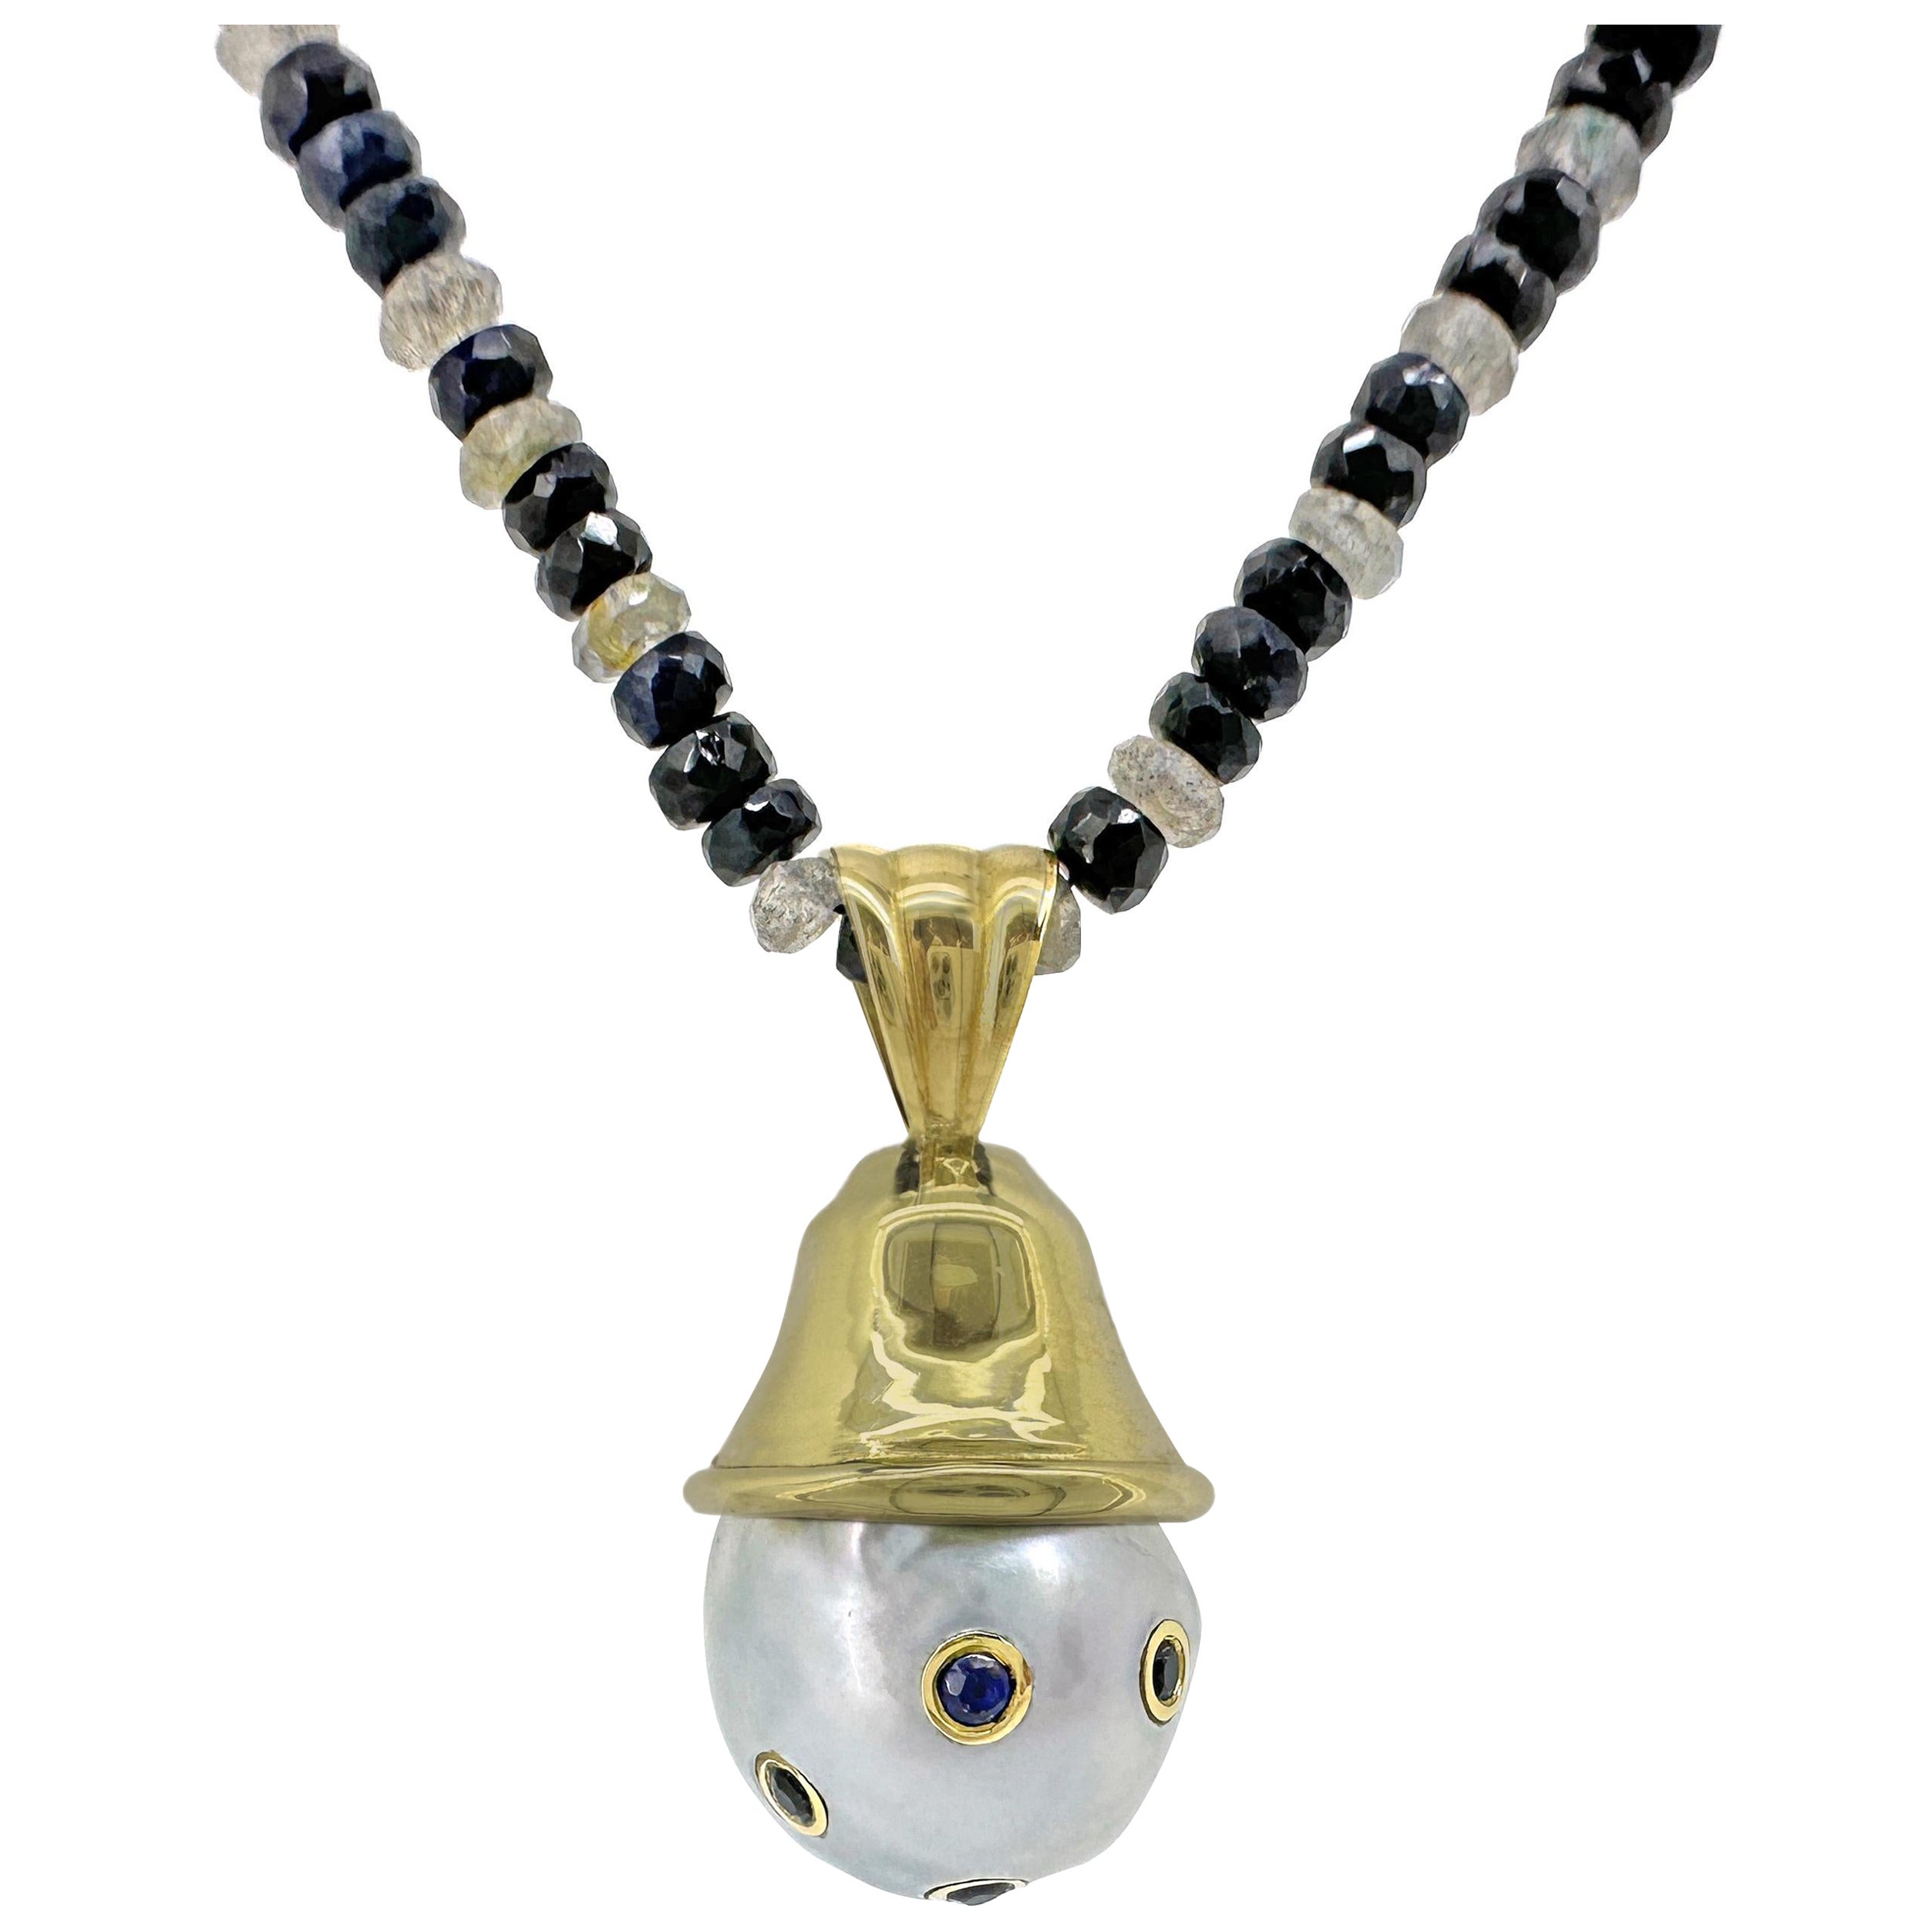 "Hugo" 16.5mm Silver Tahitian Pearl & Sapphire Fob in 18K Gold on Sapphire Chain